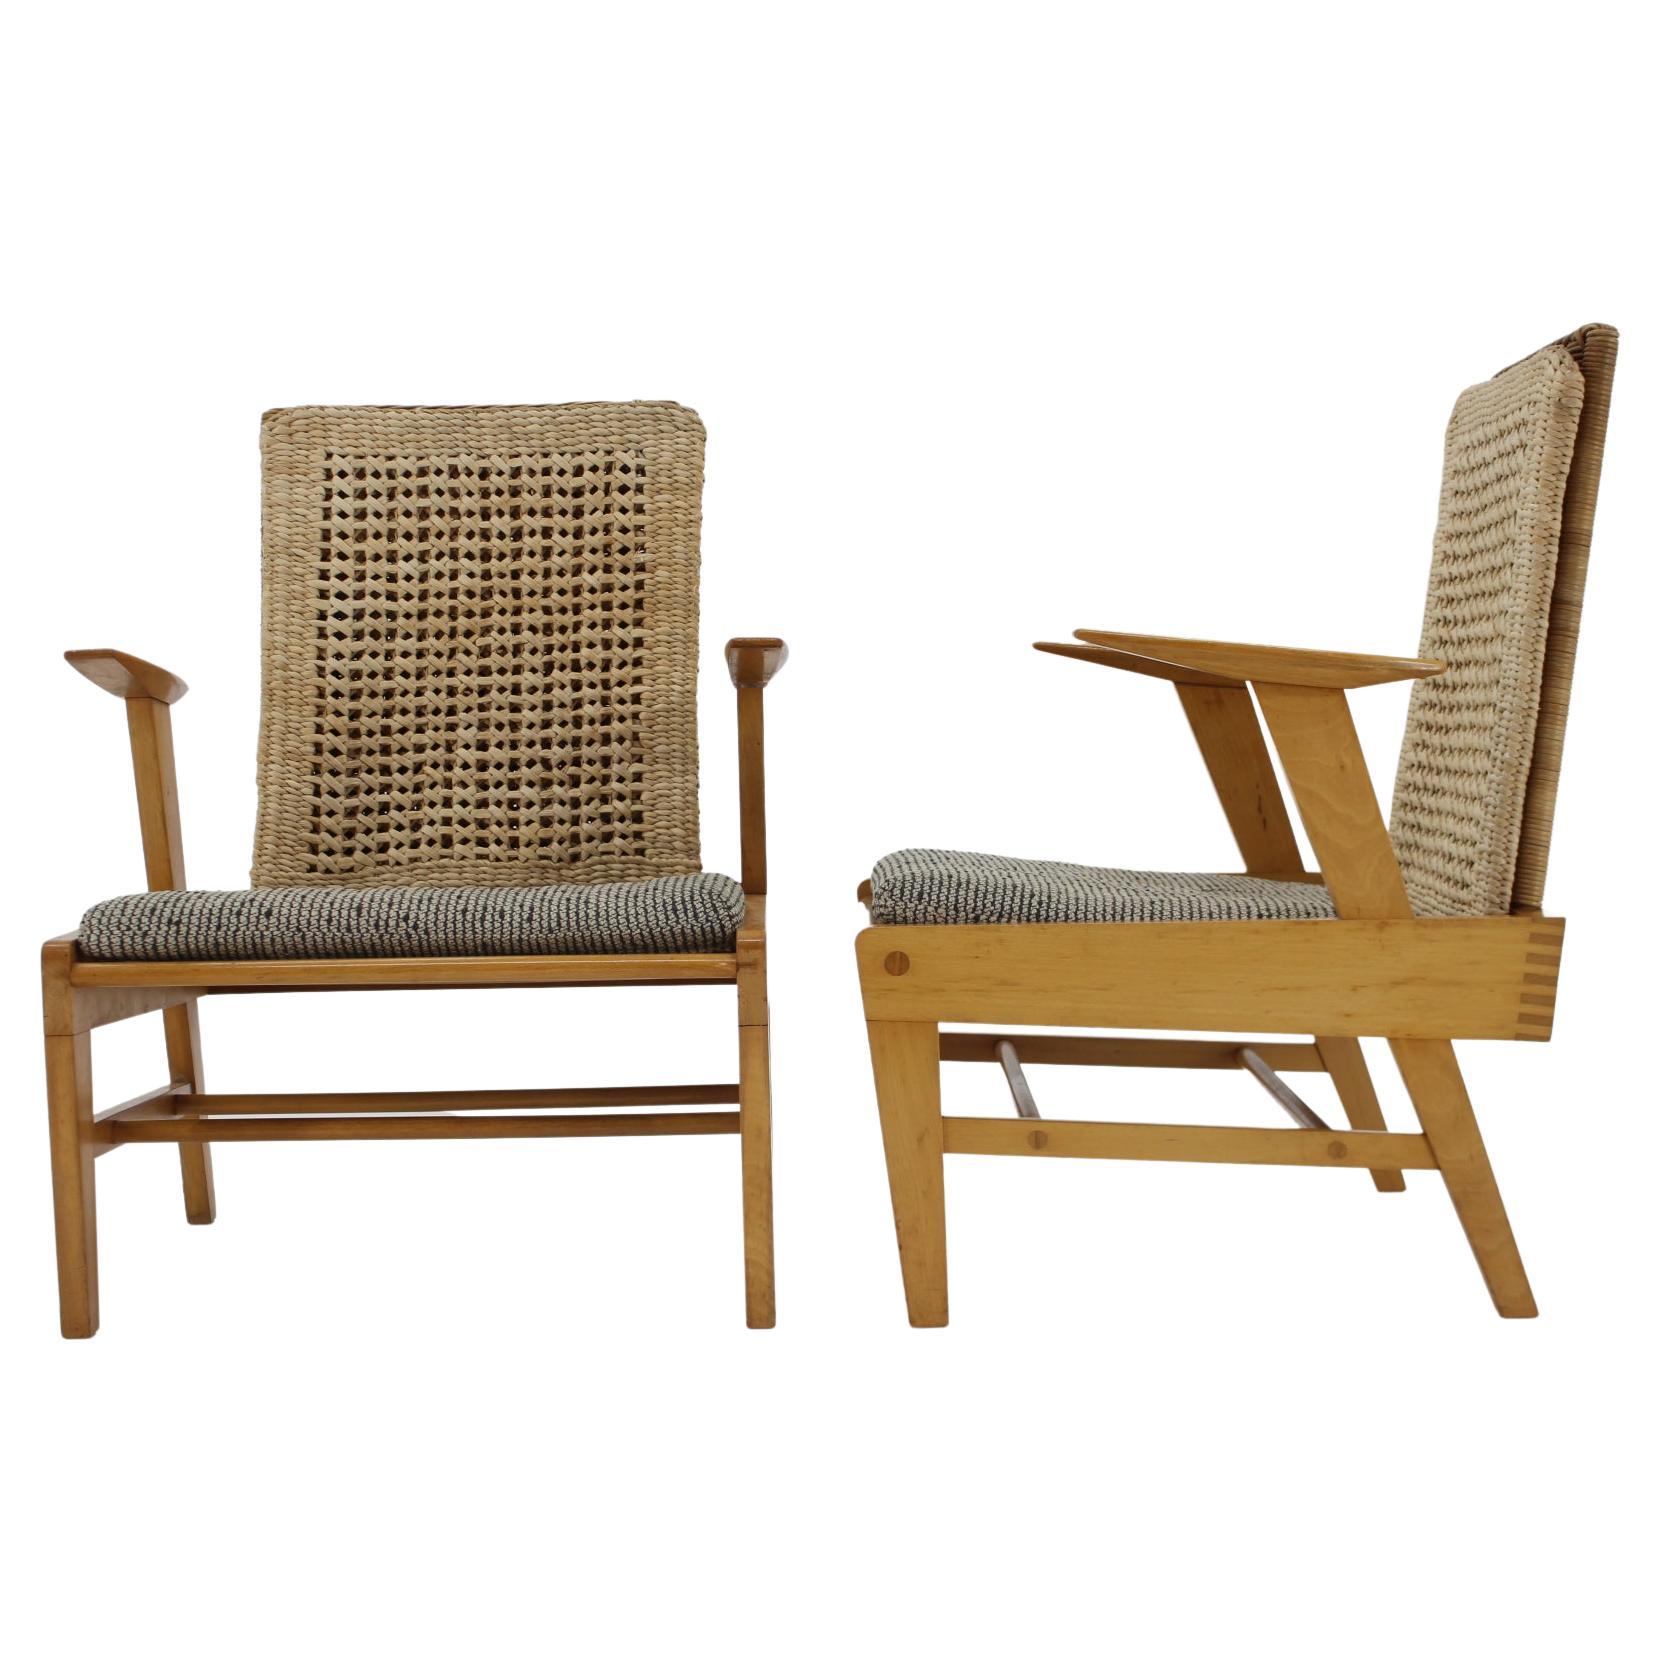 1960s, Pair of Rare Beech and Rattan Armchairs by Uluv, Czechoslovakia